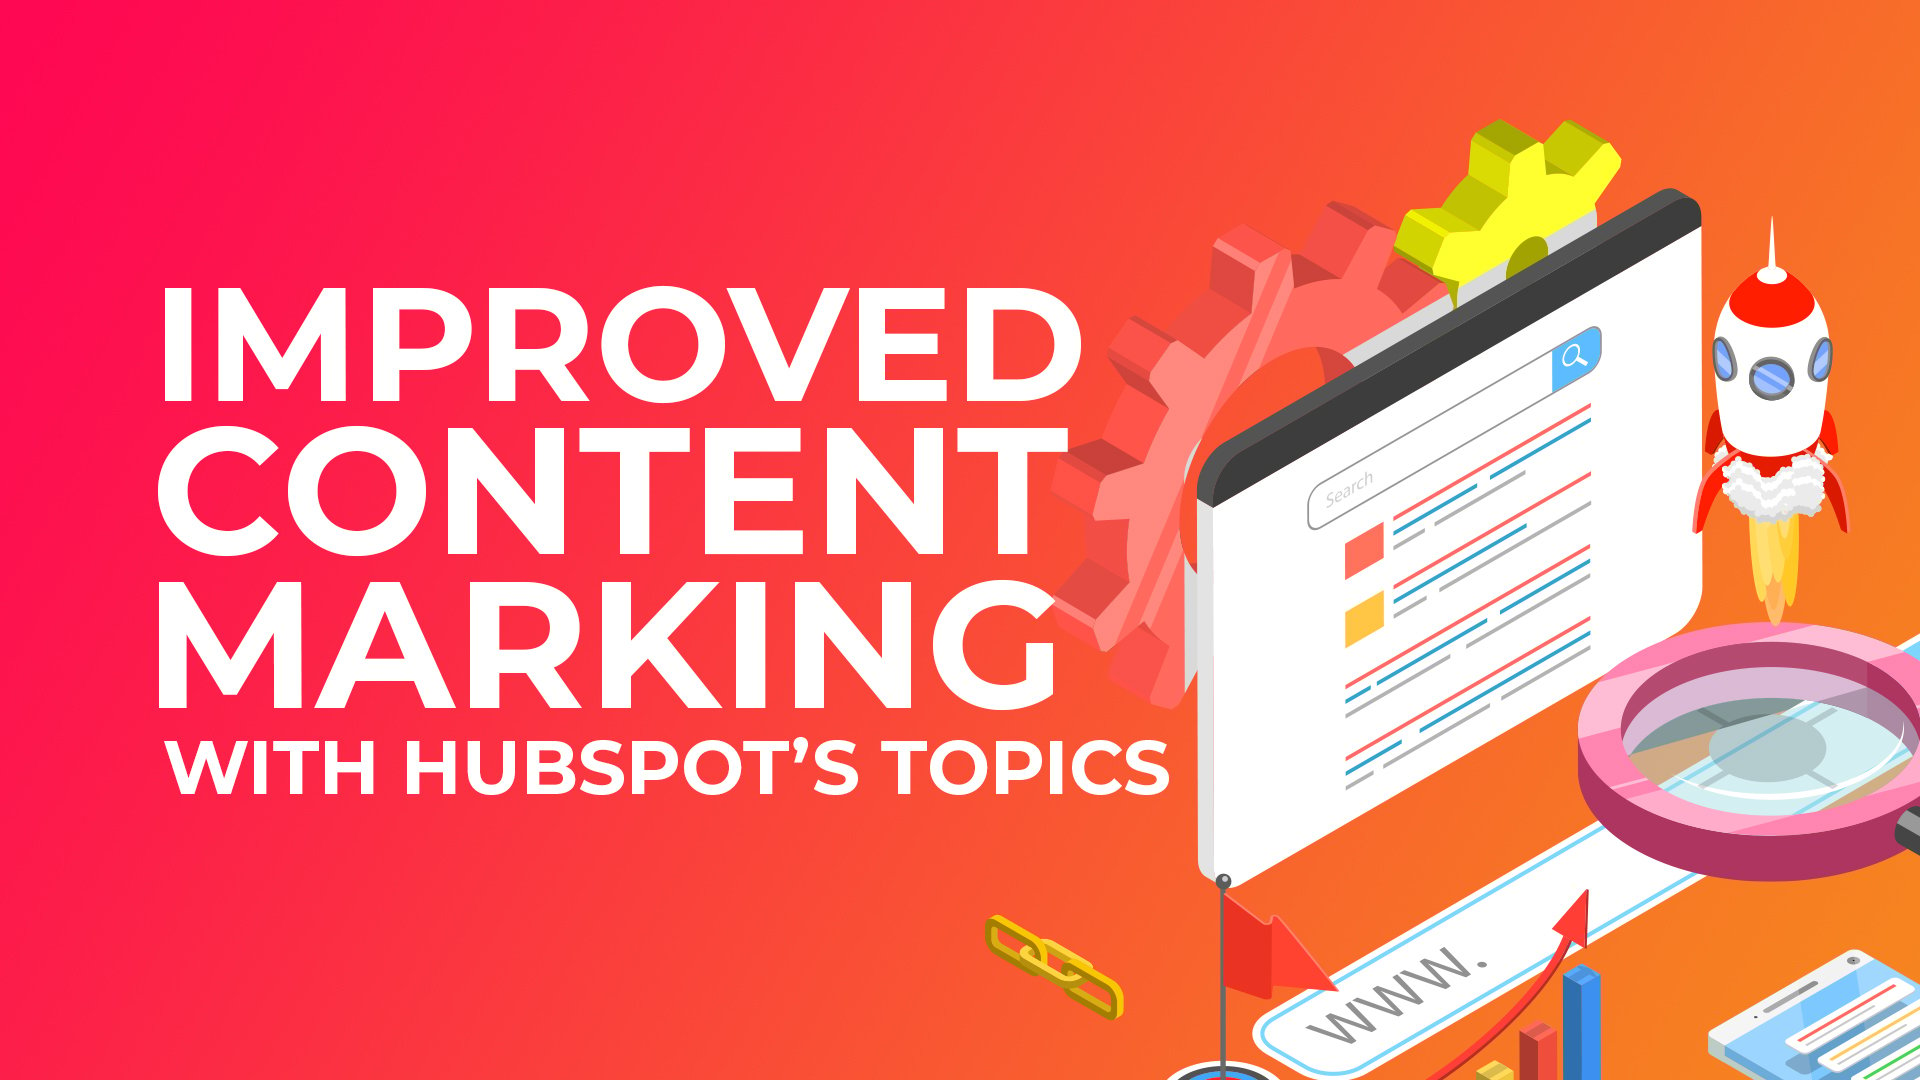 How to Use HubSpot’s Topics SEO Tool to Improve Your Content Marketing Strategy